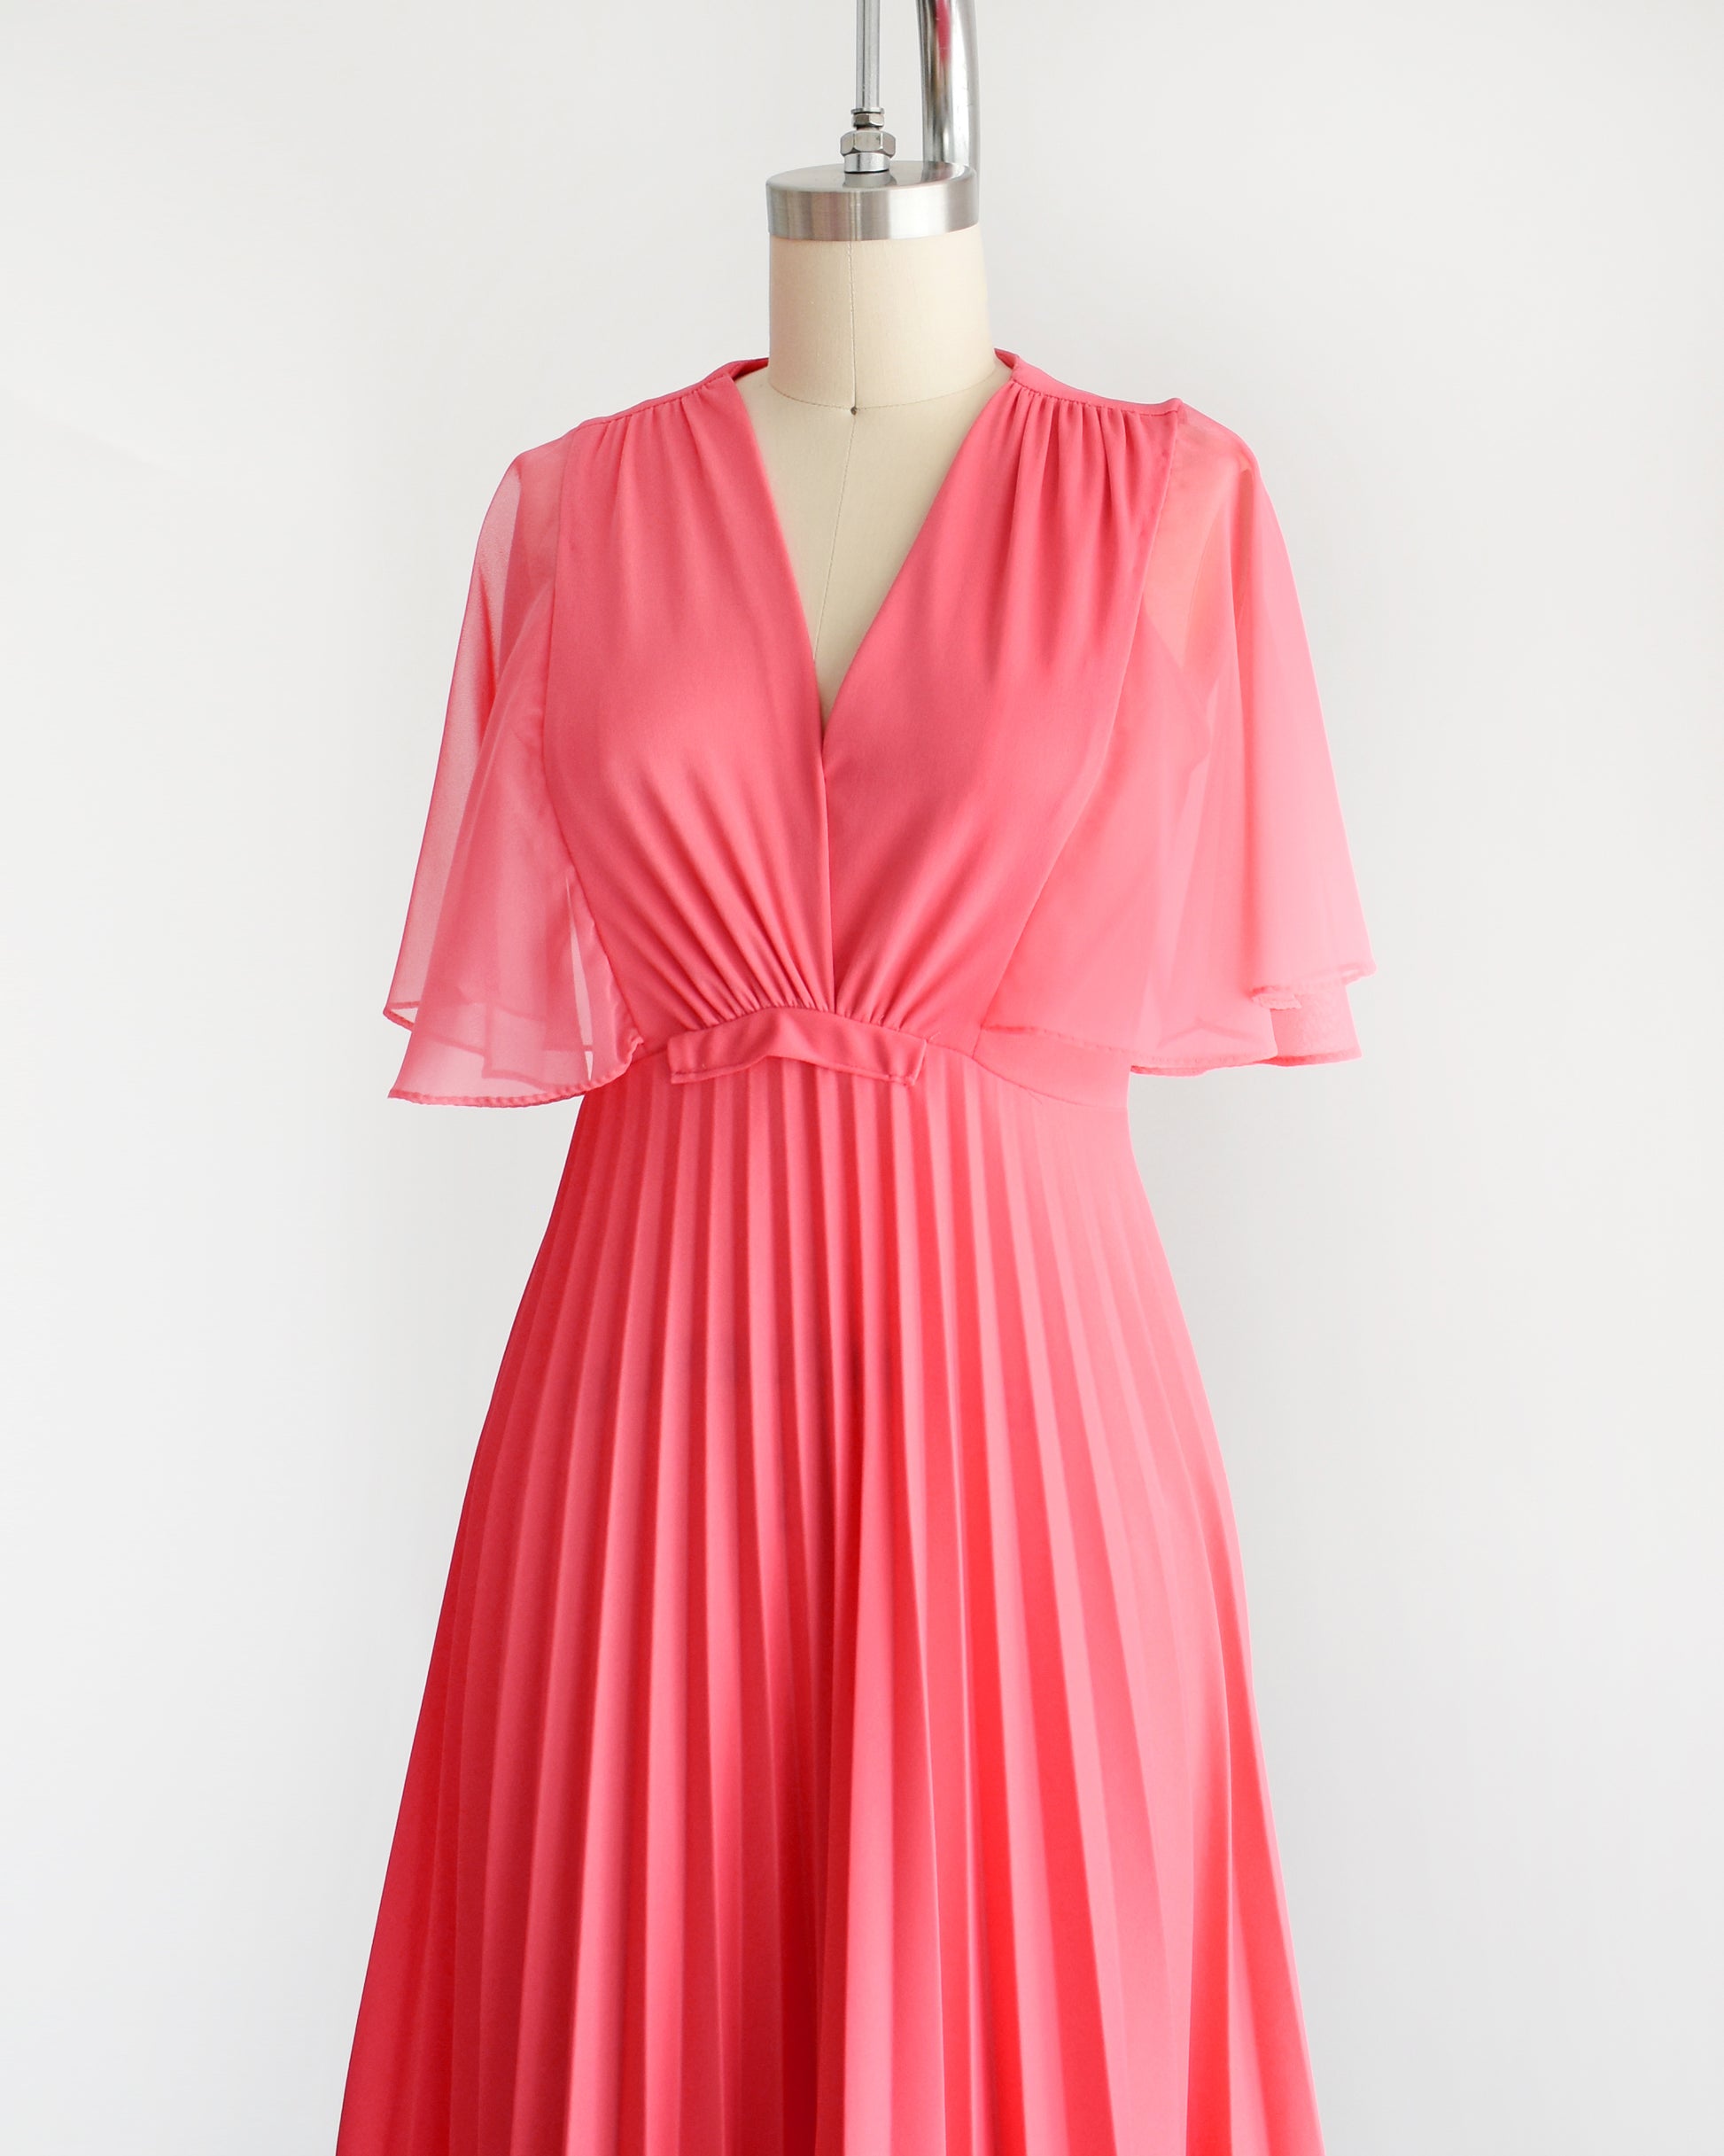 Side front view of a vintage 70s coral pink maxi dress that has a faux wrap front with semi-sheer flutter sleeves, empire waist, and a long flowing accordion pleated skirt. The dress is on a dress form.